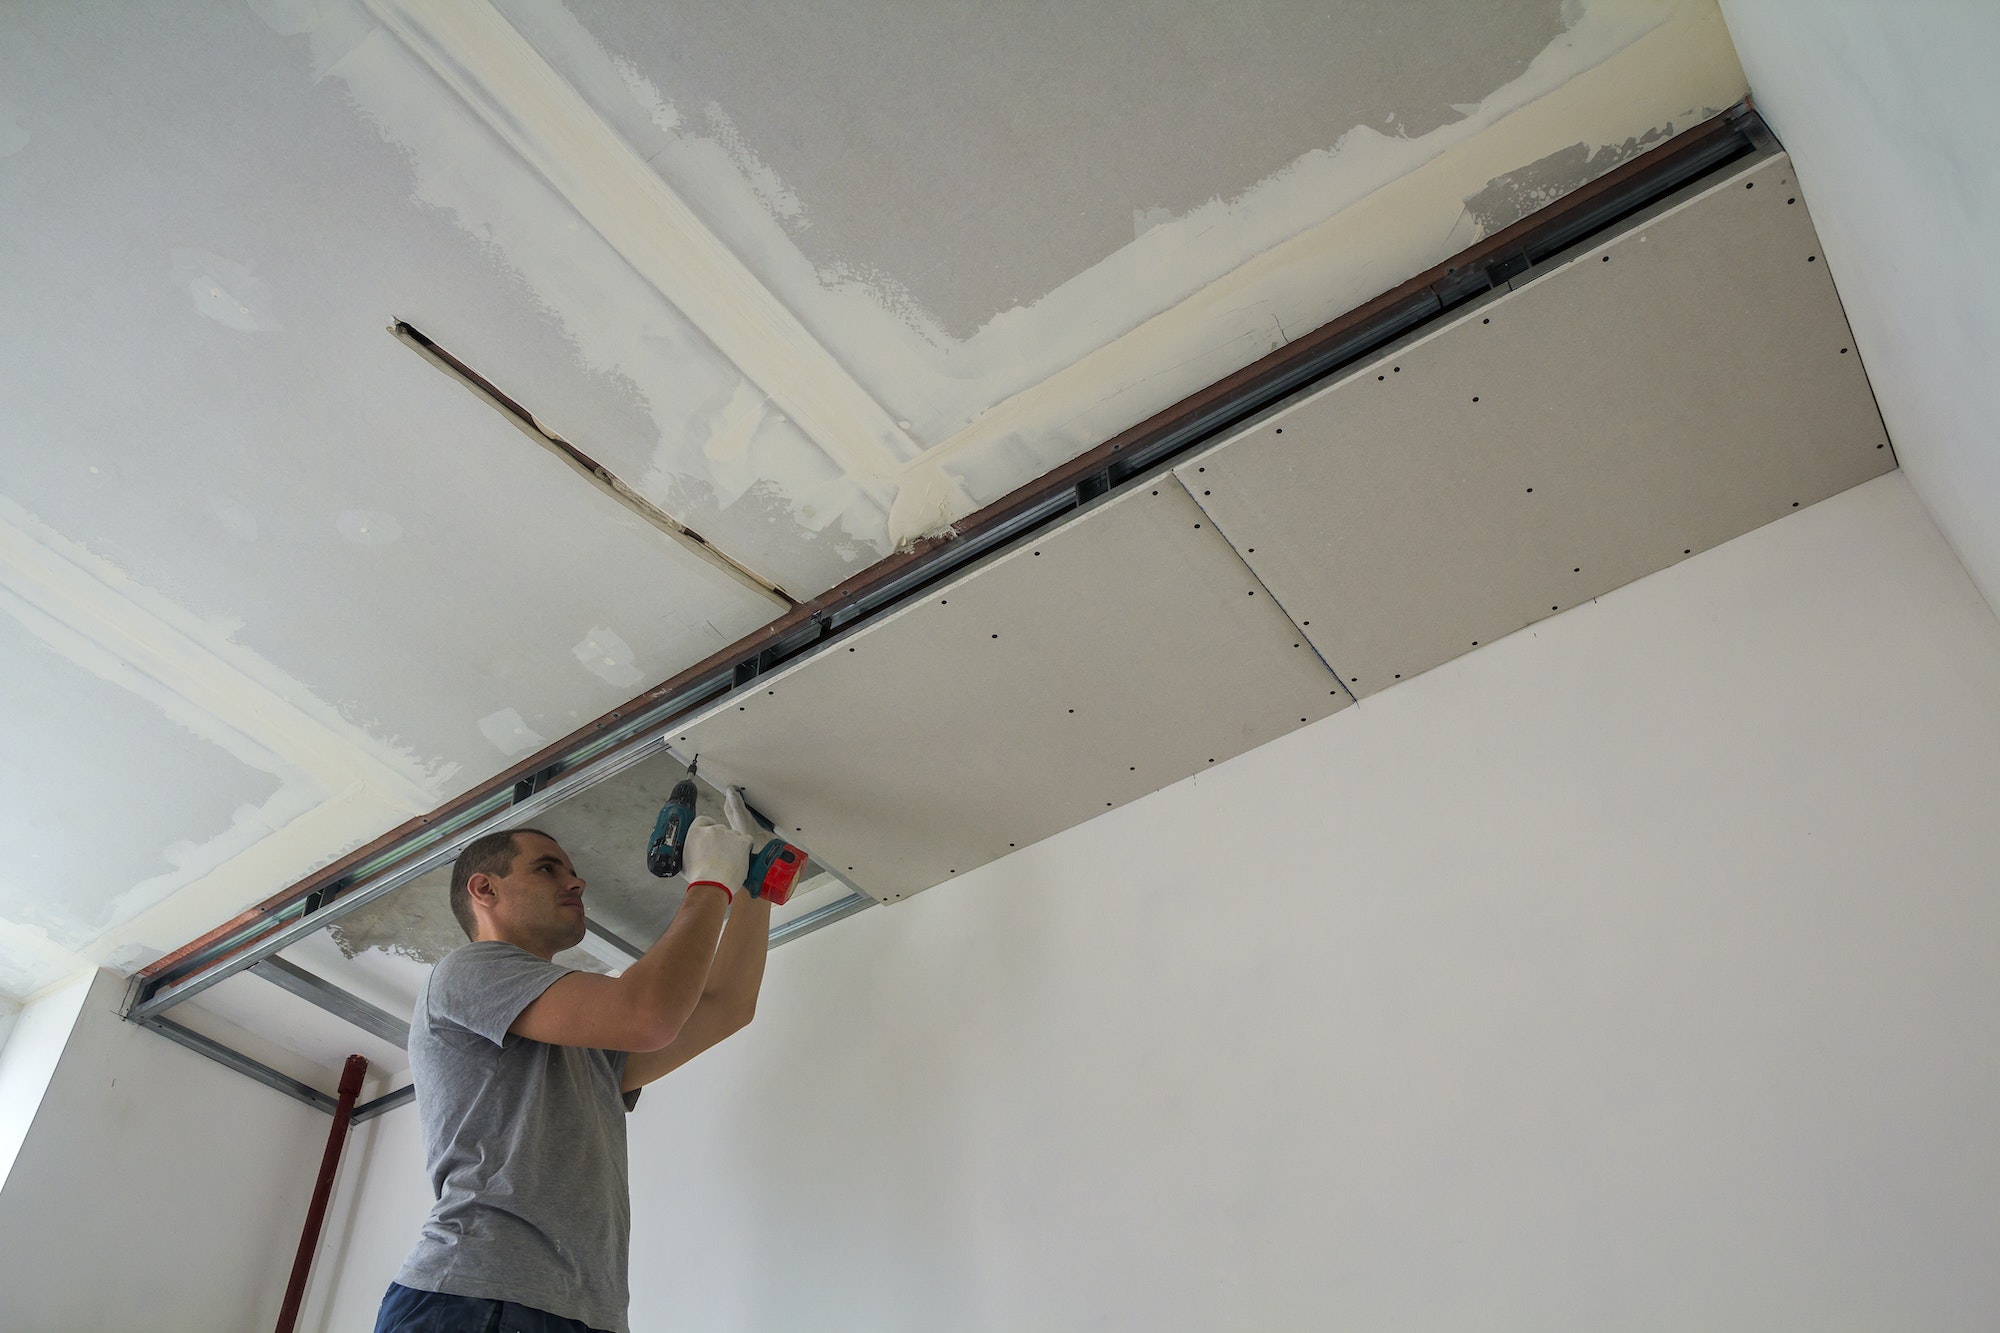 Construction worker assemble a suspended ceiling with drywall and fixing the drywall to the ceiling